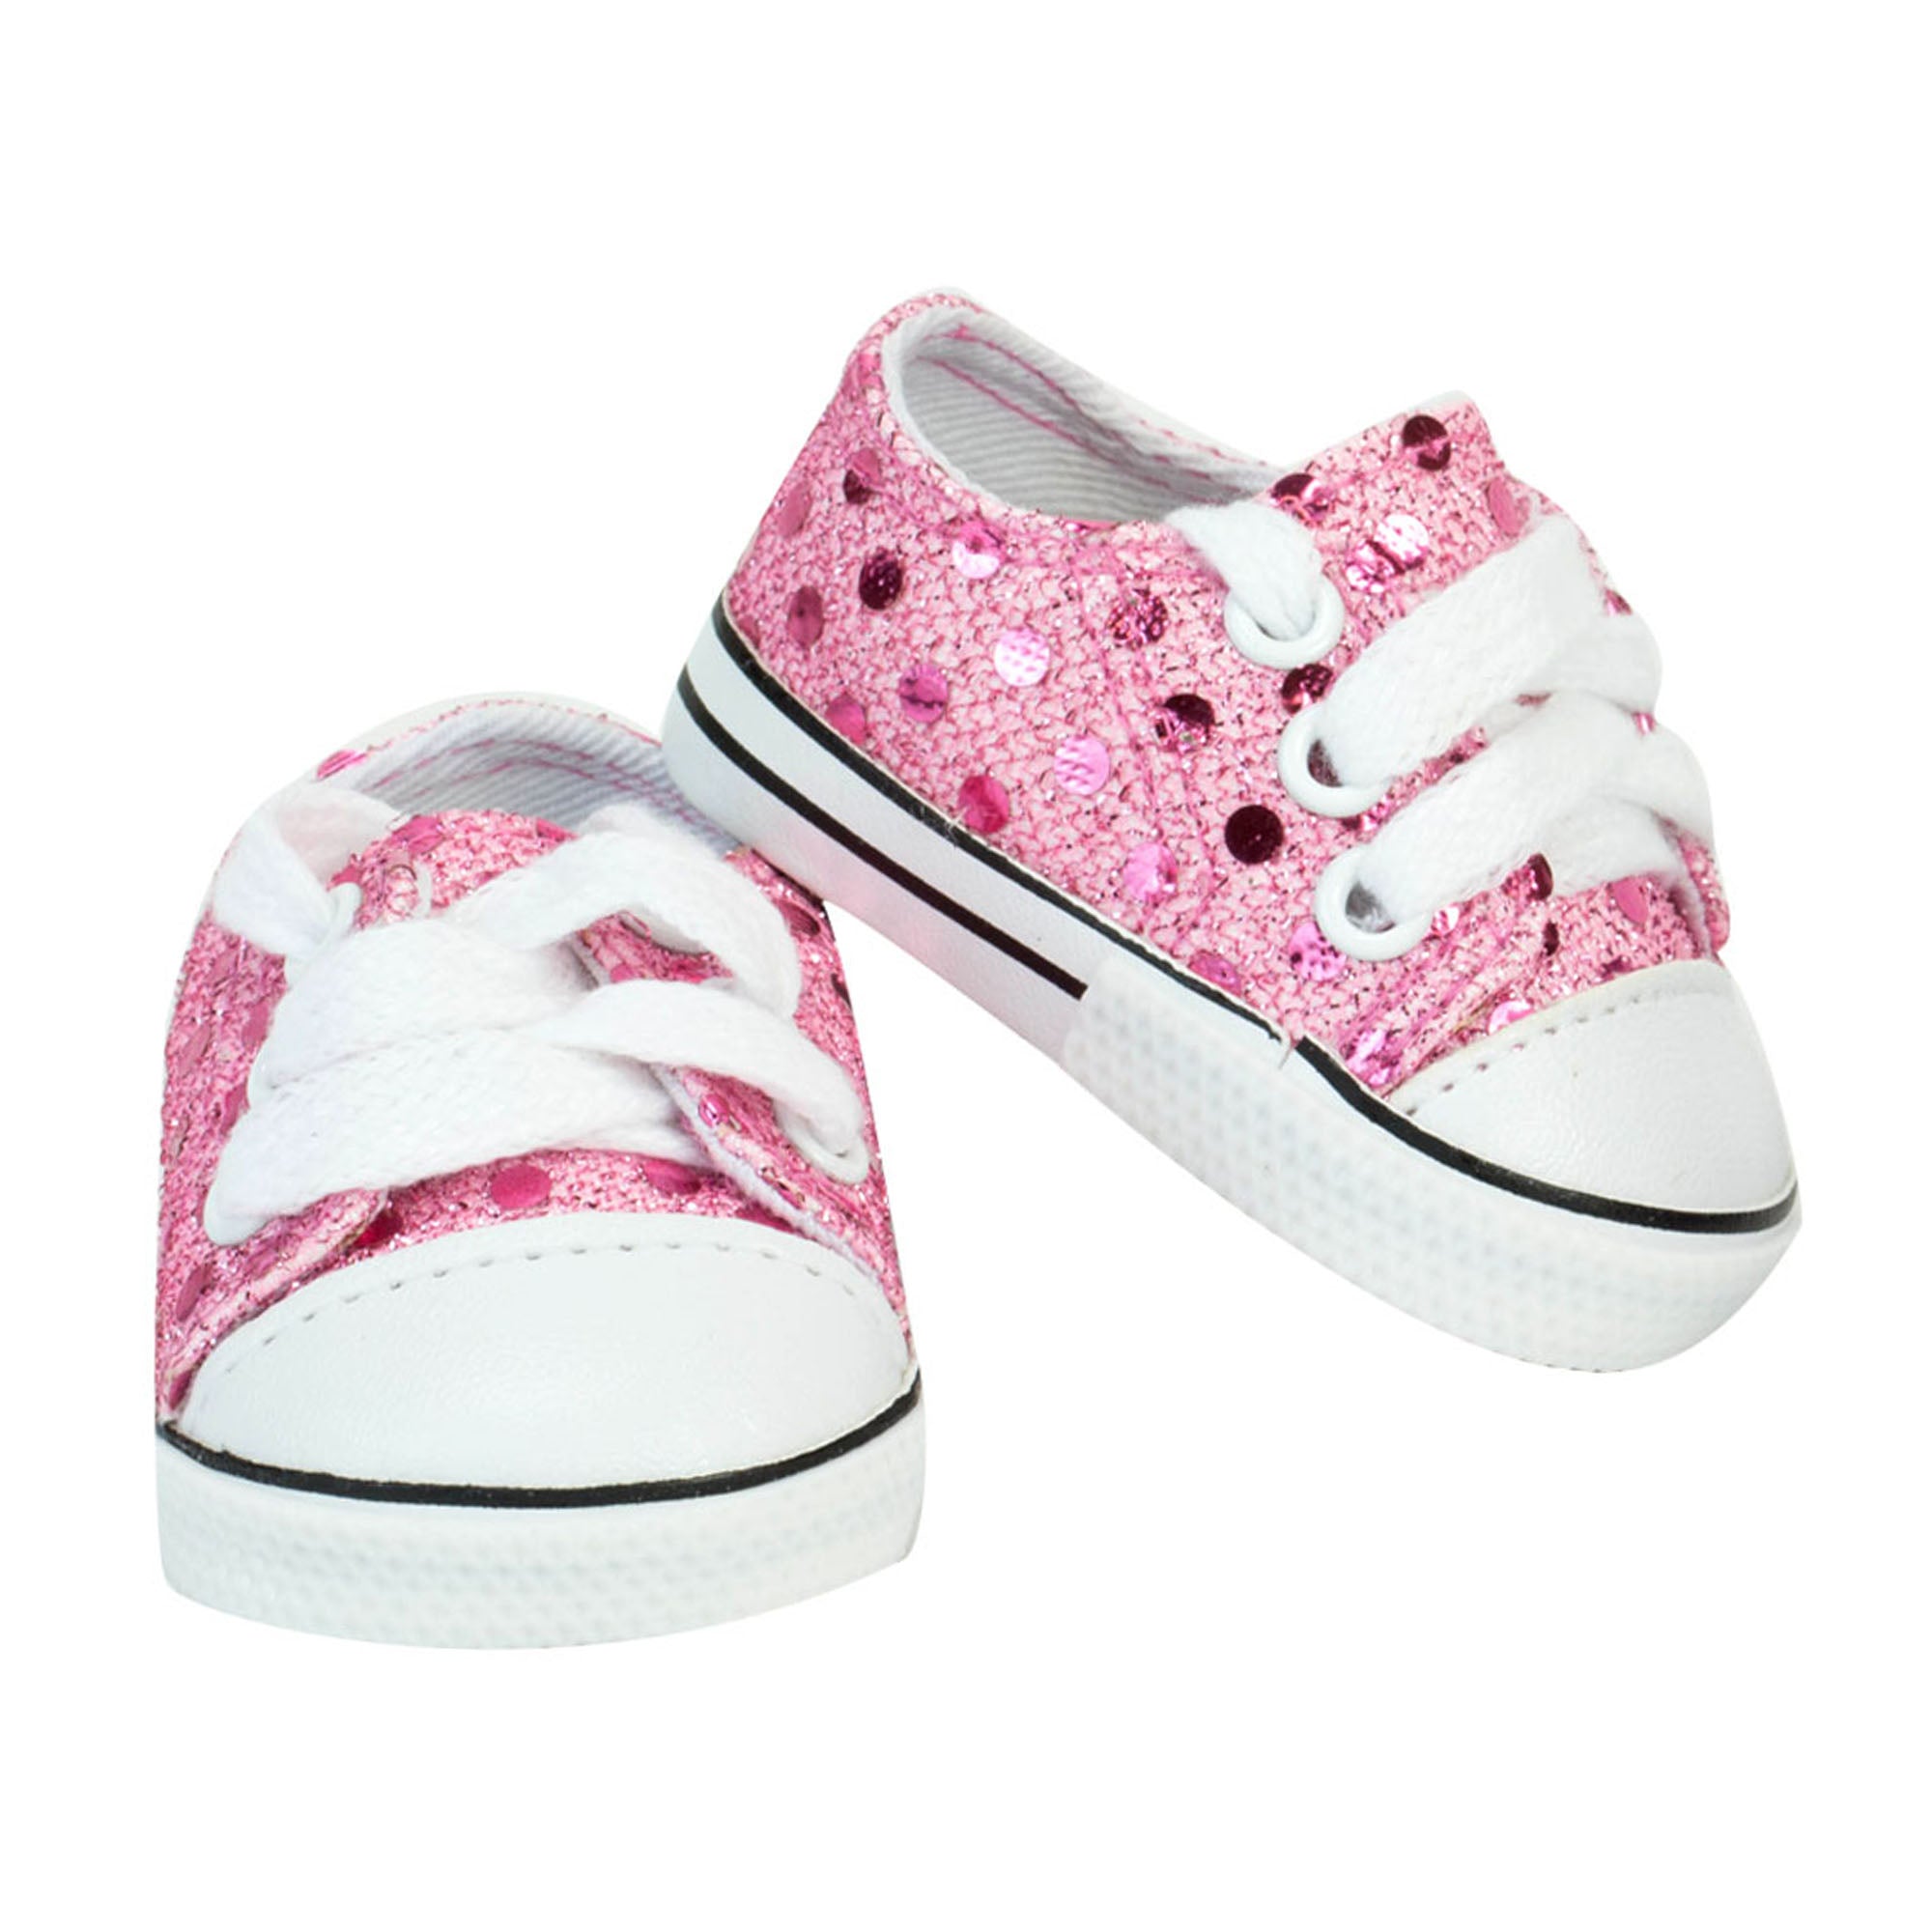 Sophia’s Cute Low-Top Canvas Sneakers with Allover Sparkly Sequins & Classic Exposed Seams for 18” Dolls, Pink